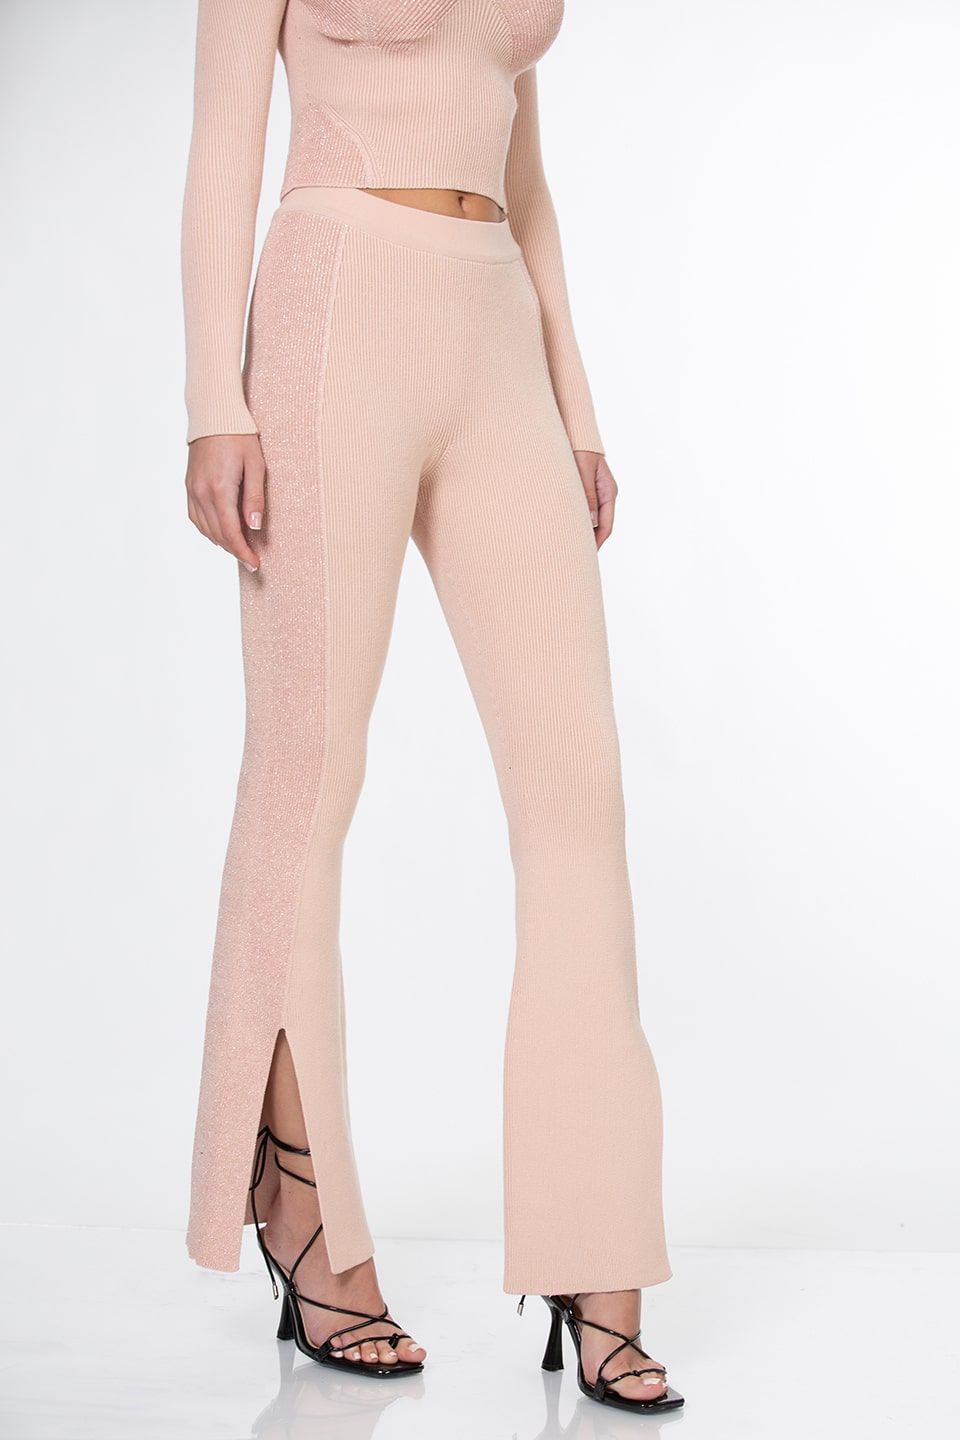 Thumbnail for Product gallery 1, Seven Pants Pink